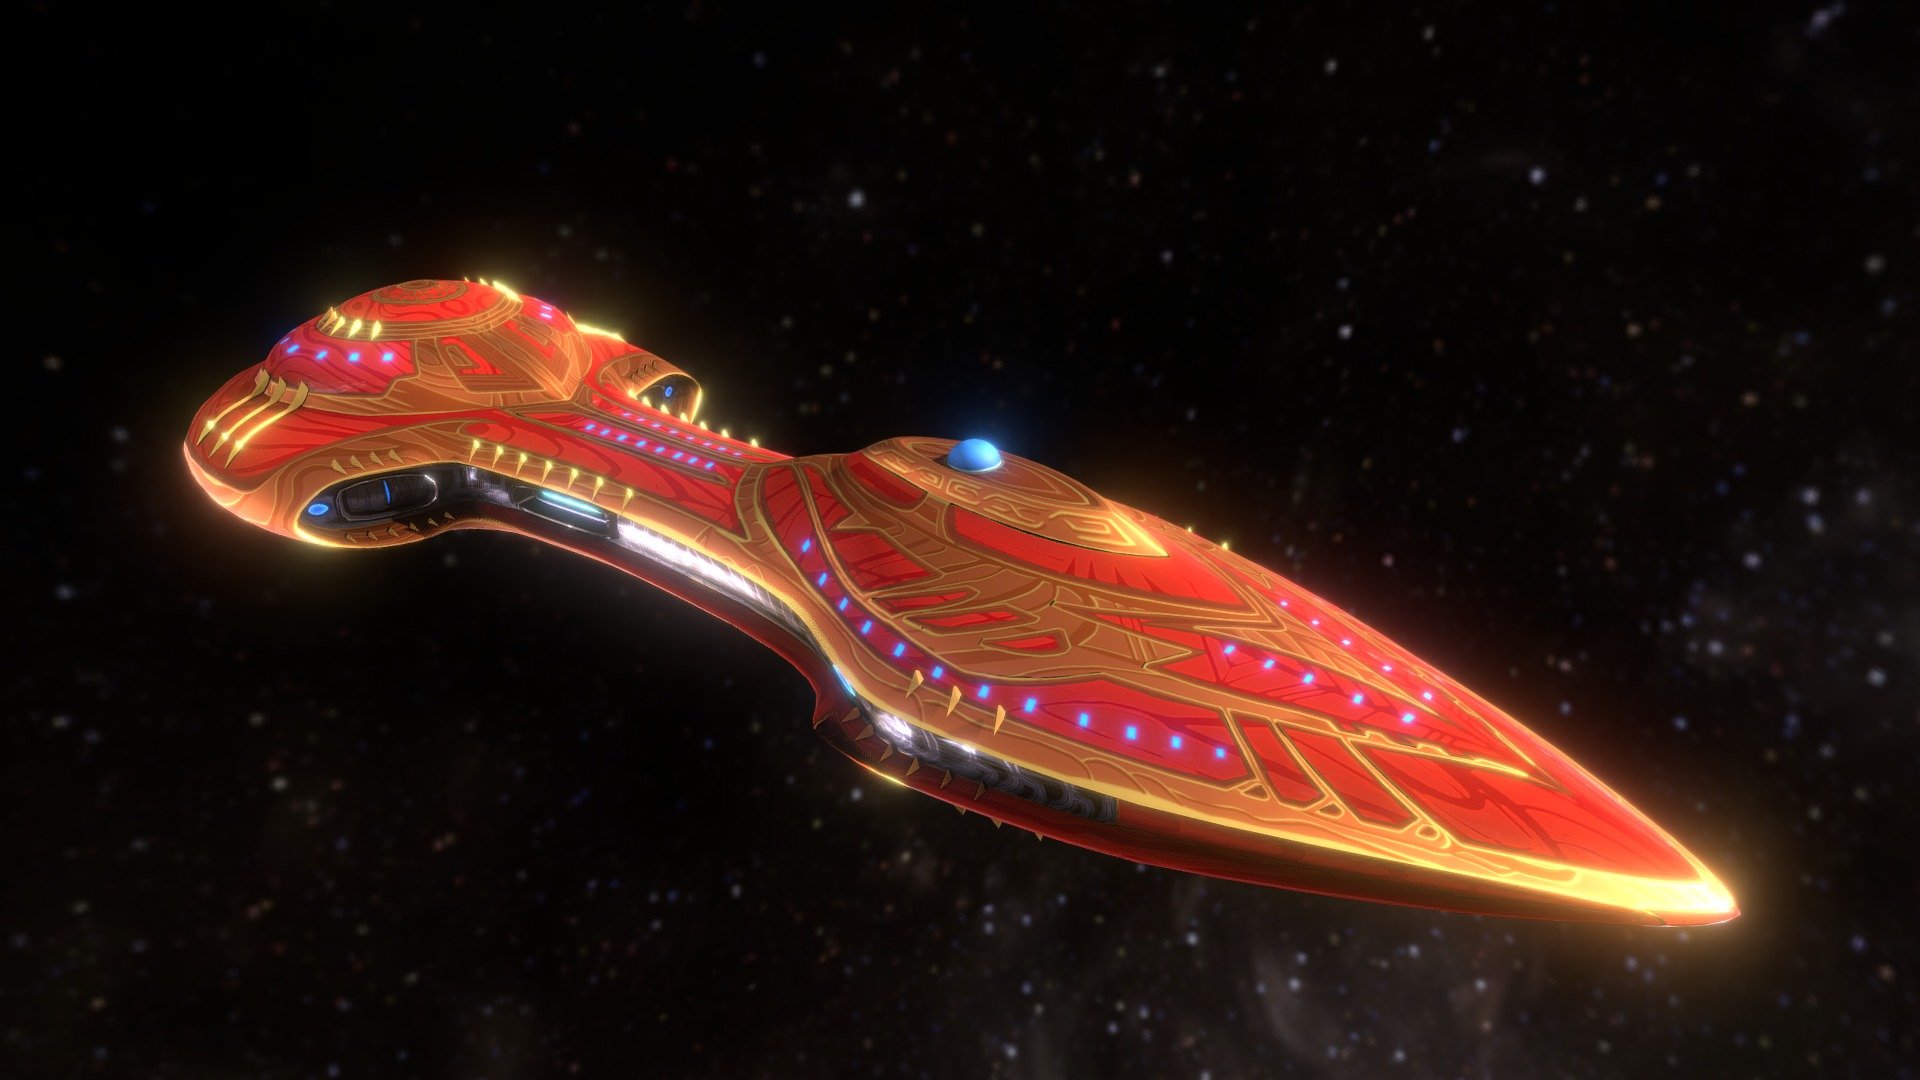 The starship of Evelyn Esendria Tarth, from the Eve of Destruction series. This is a luxury heavy cruiser of the Astral Sojourner class 3d model